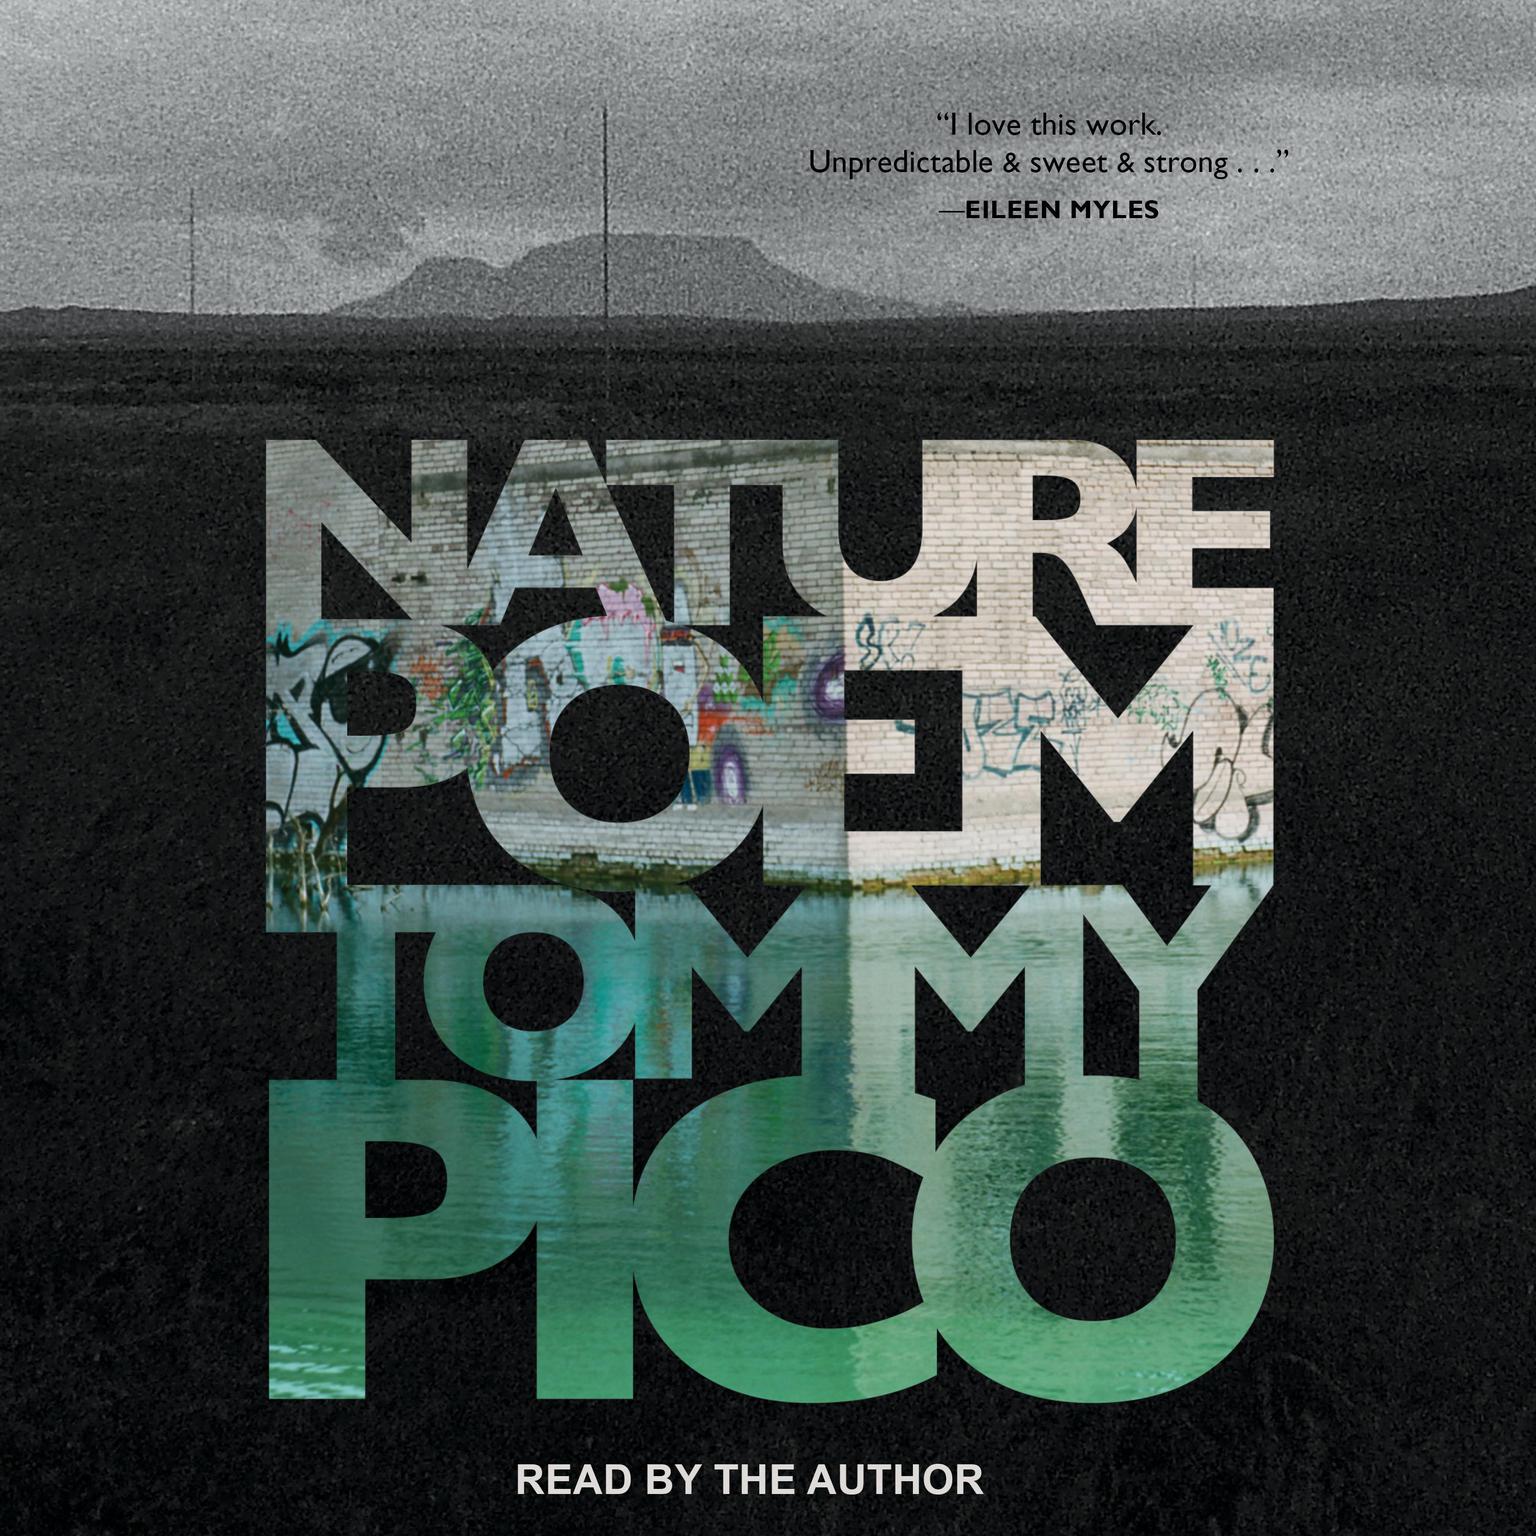 Nature Poem Audiobook, by Tommy Pico